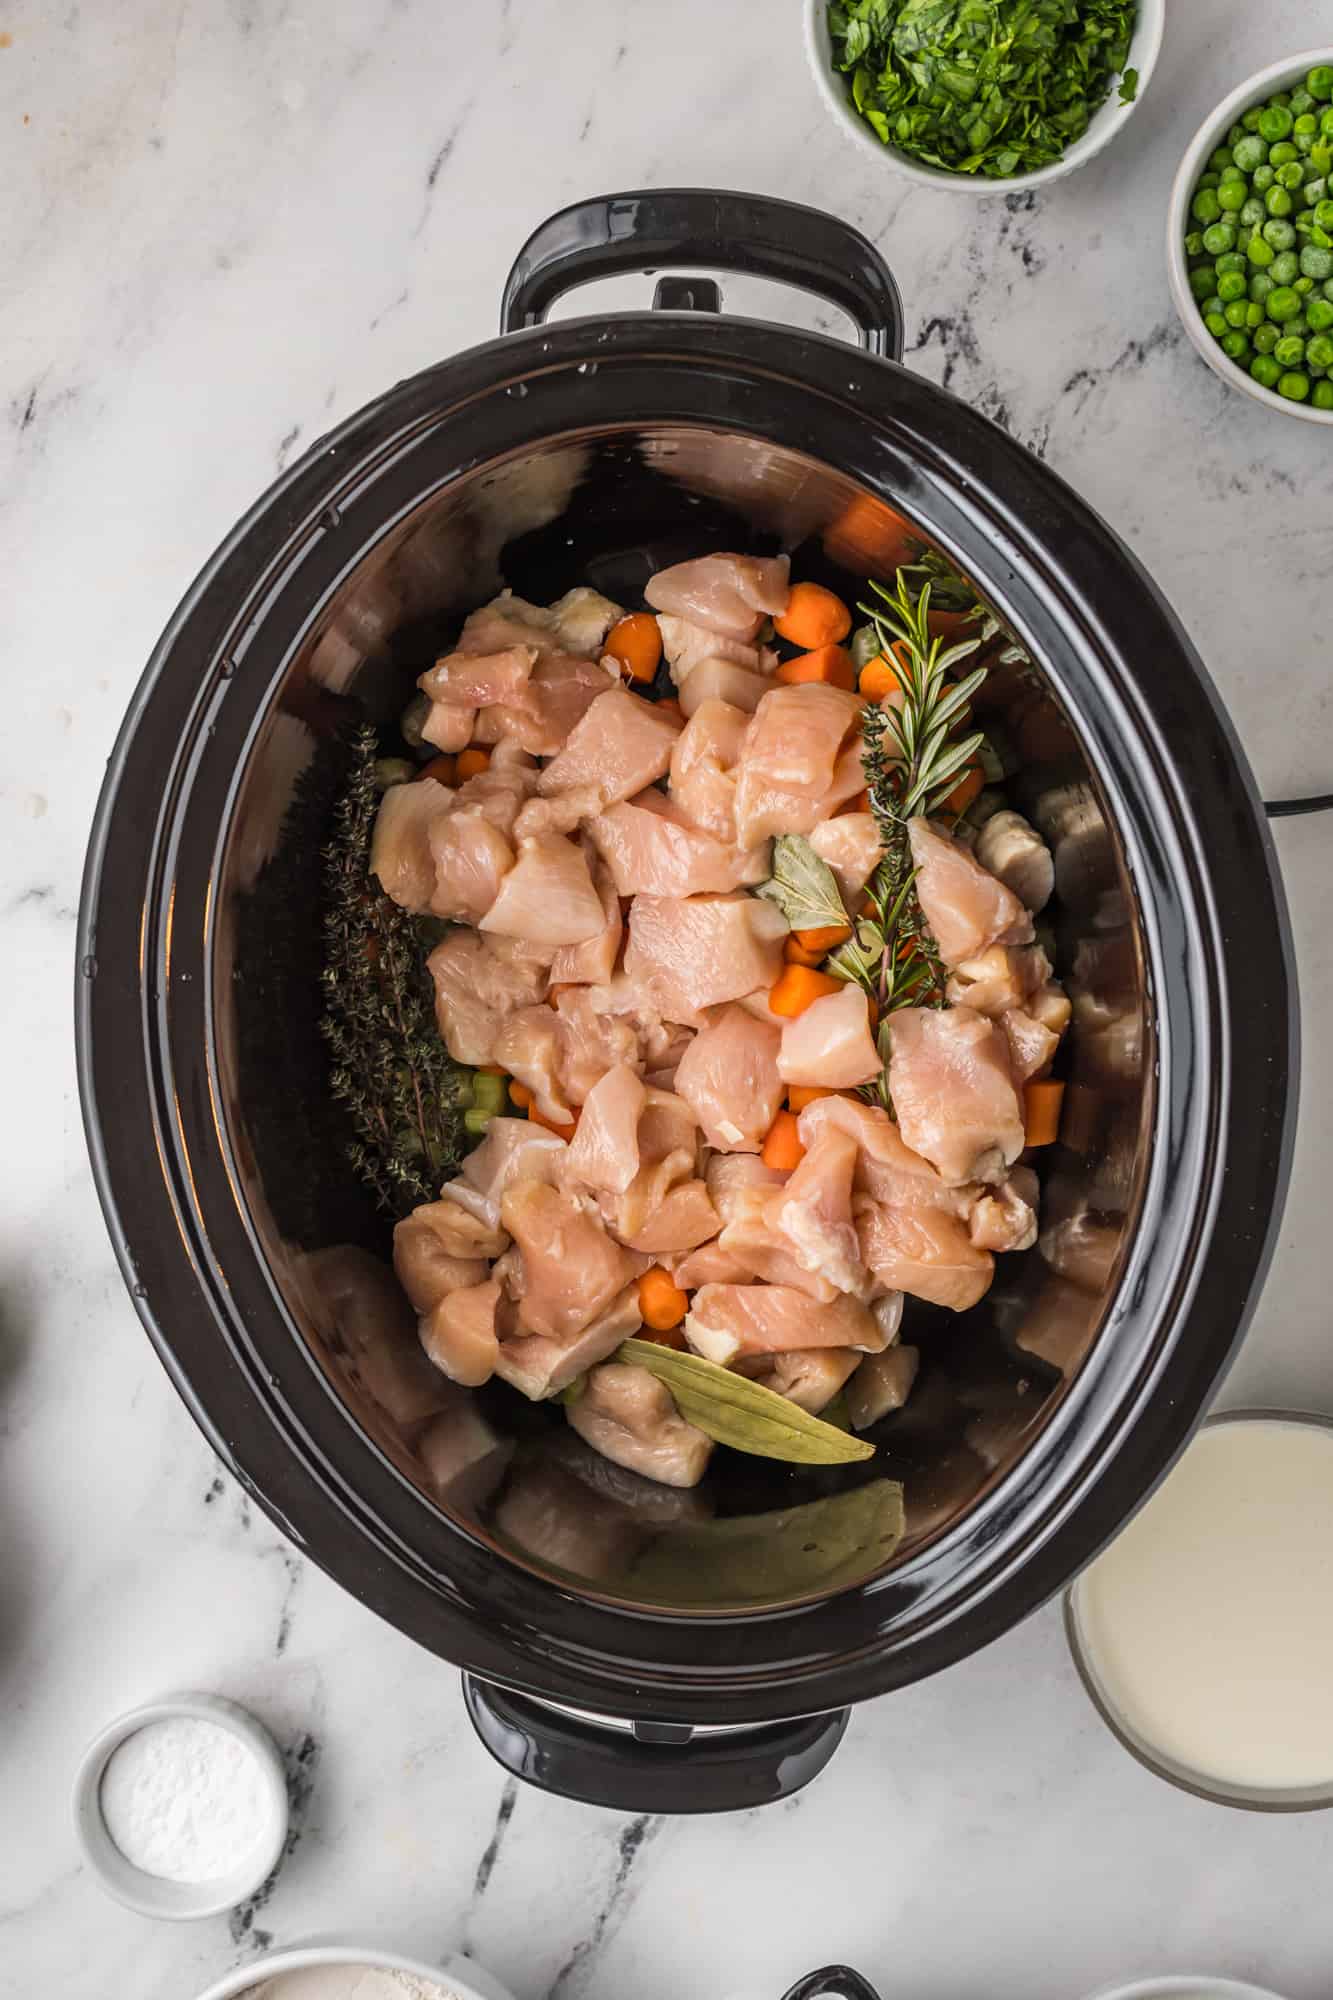 Chicken and herbs added to crock pot.